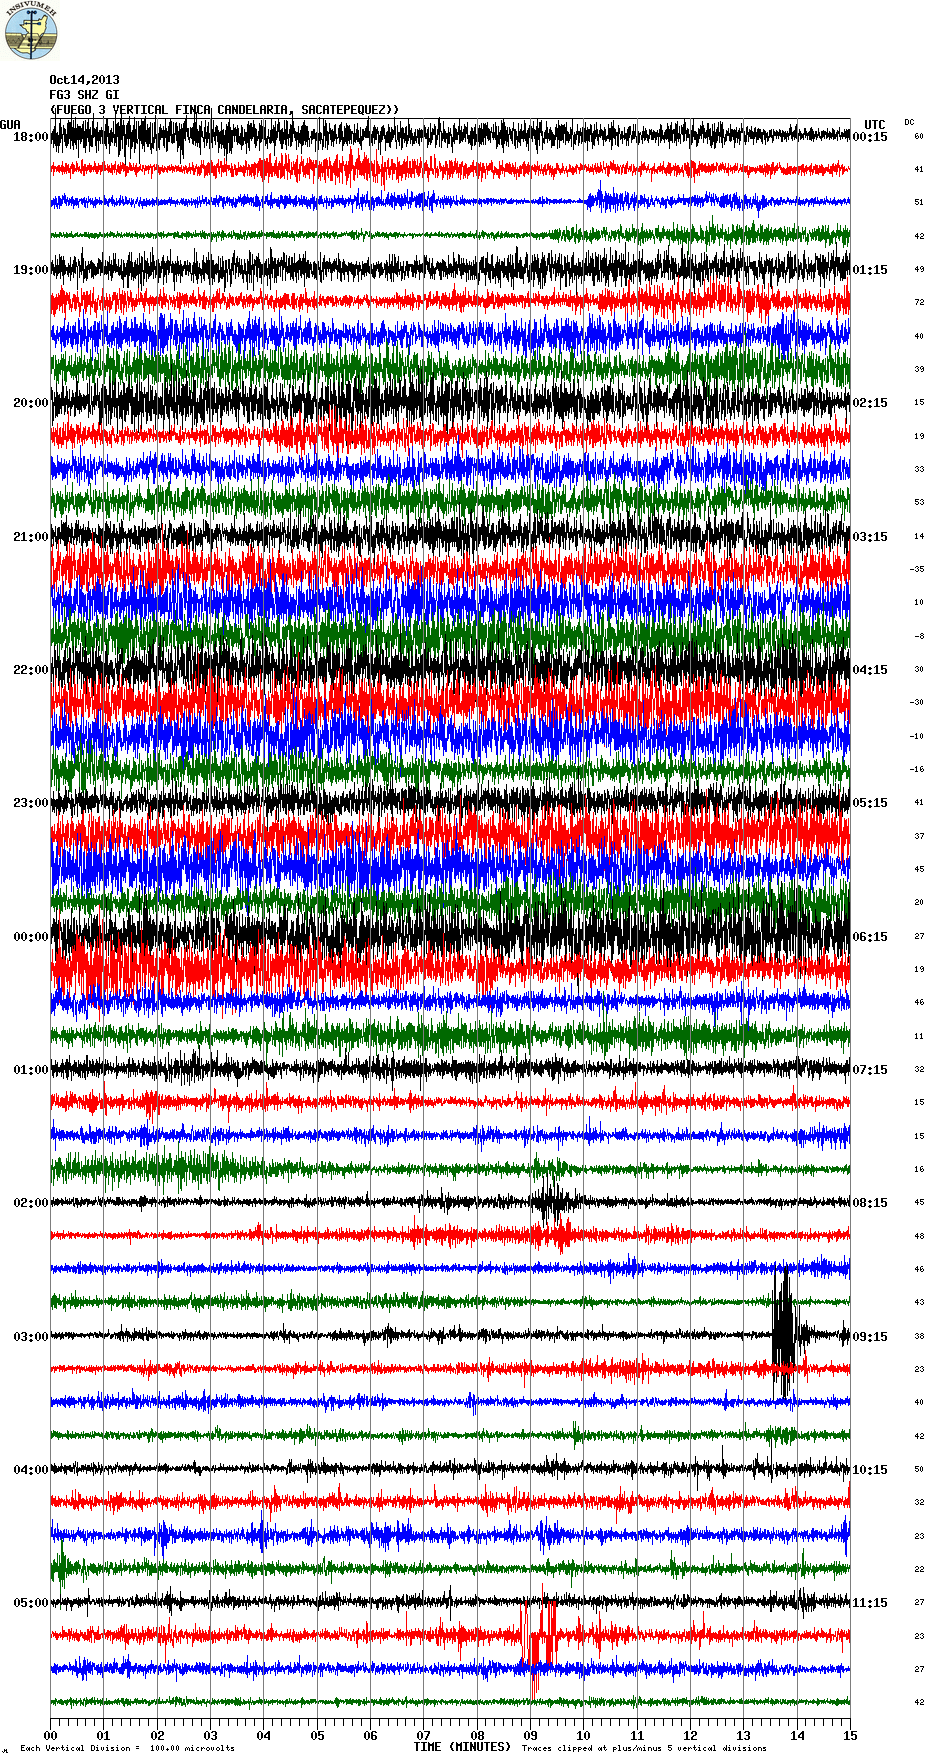 This morning's seismic signal from Fuego volcano (FG3 station, INSIVUMEH)